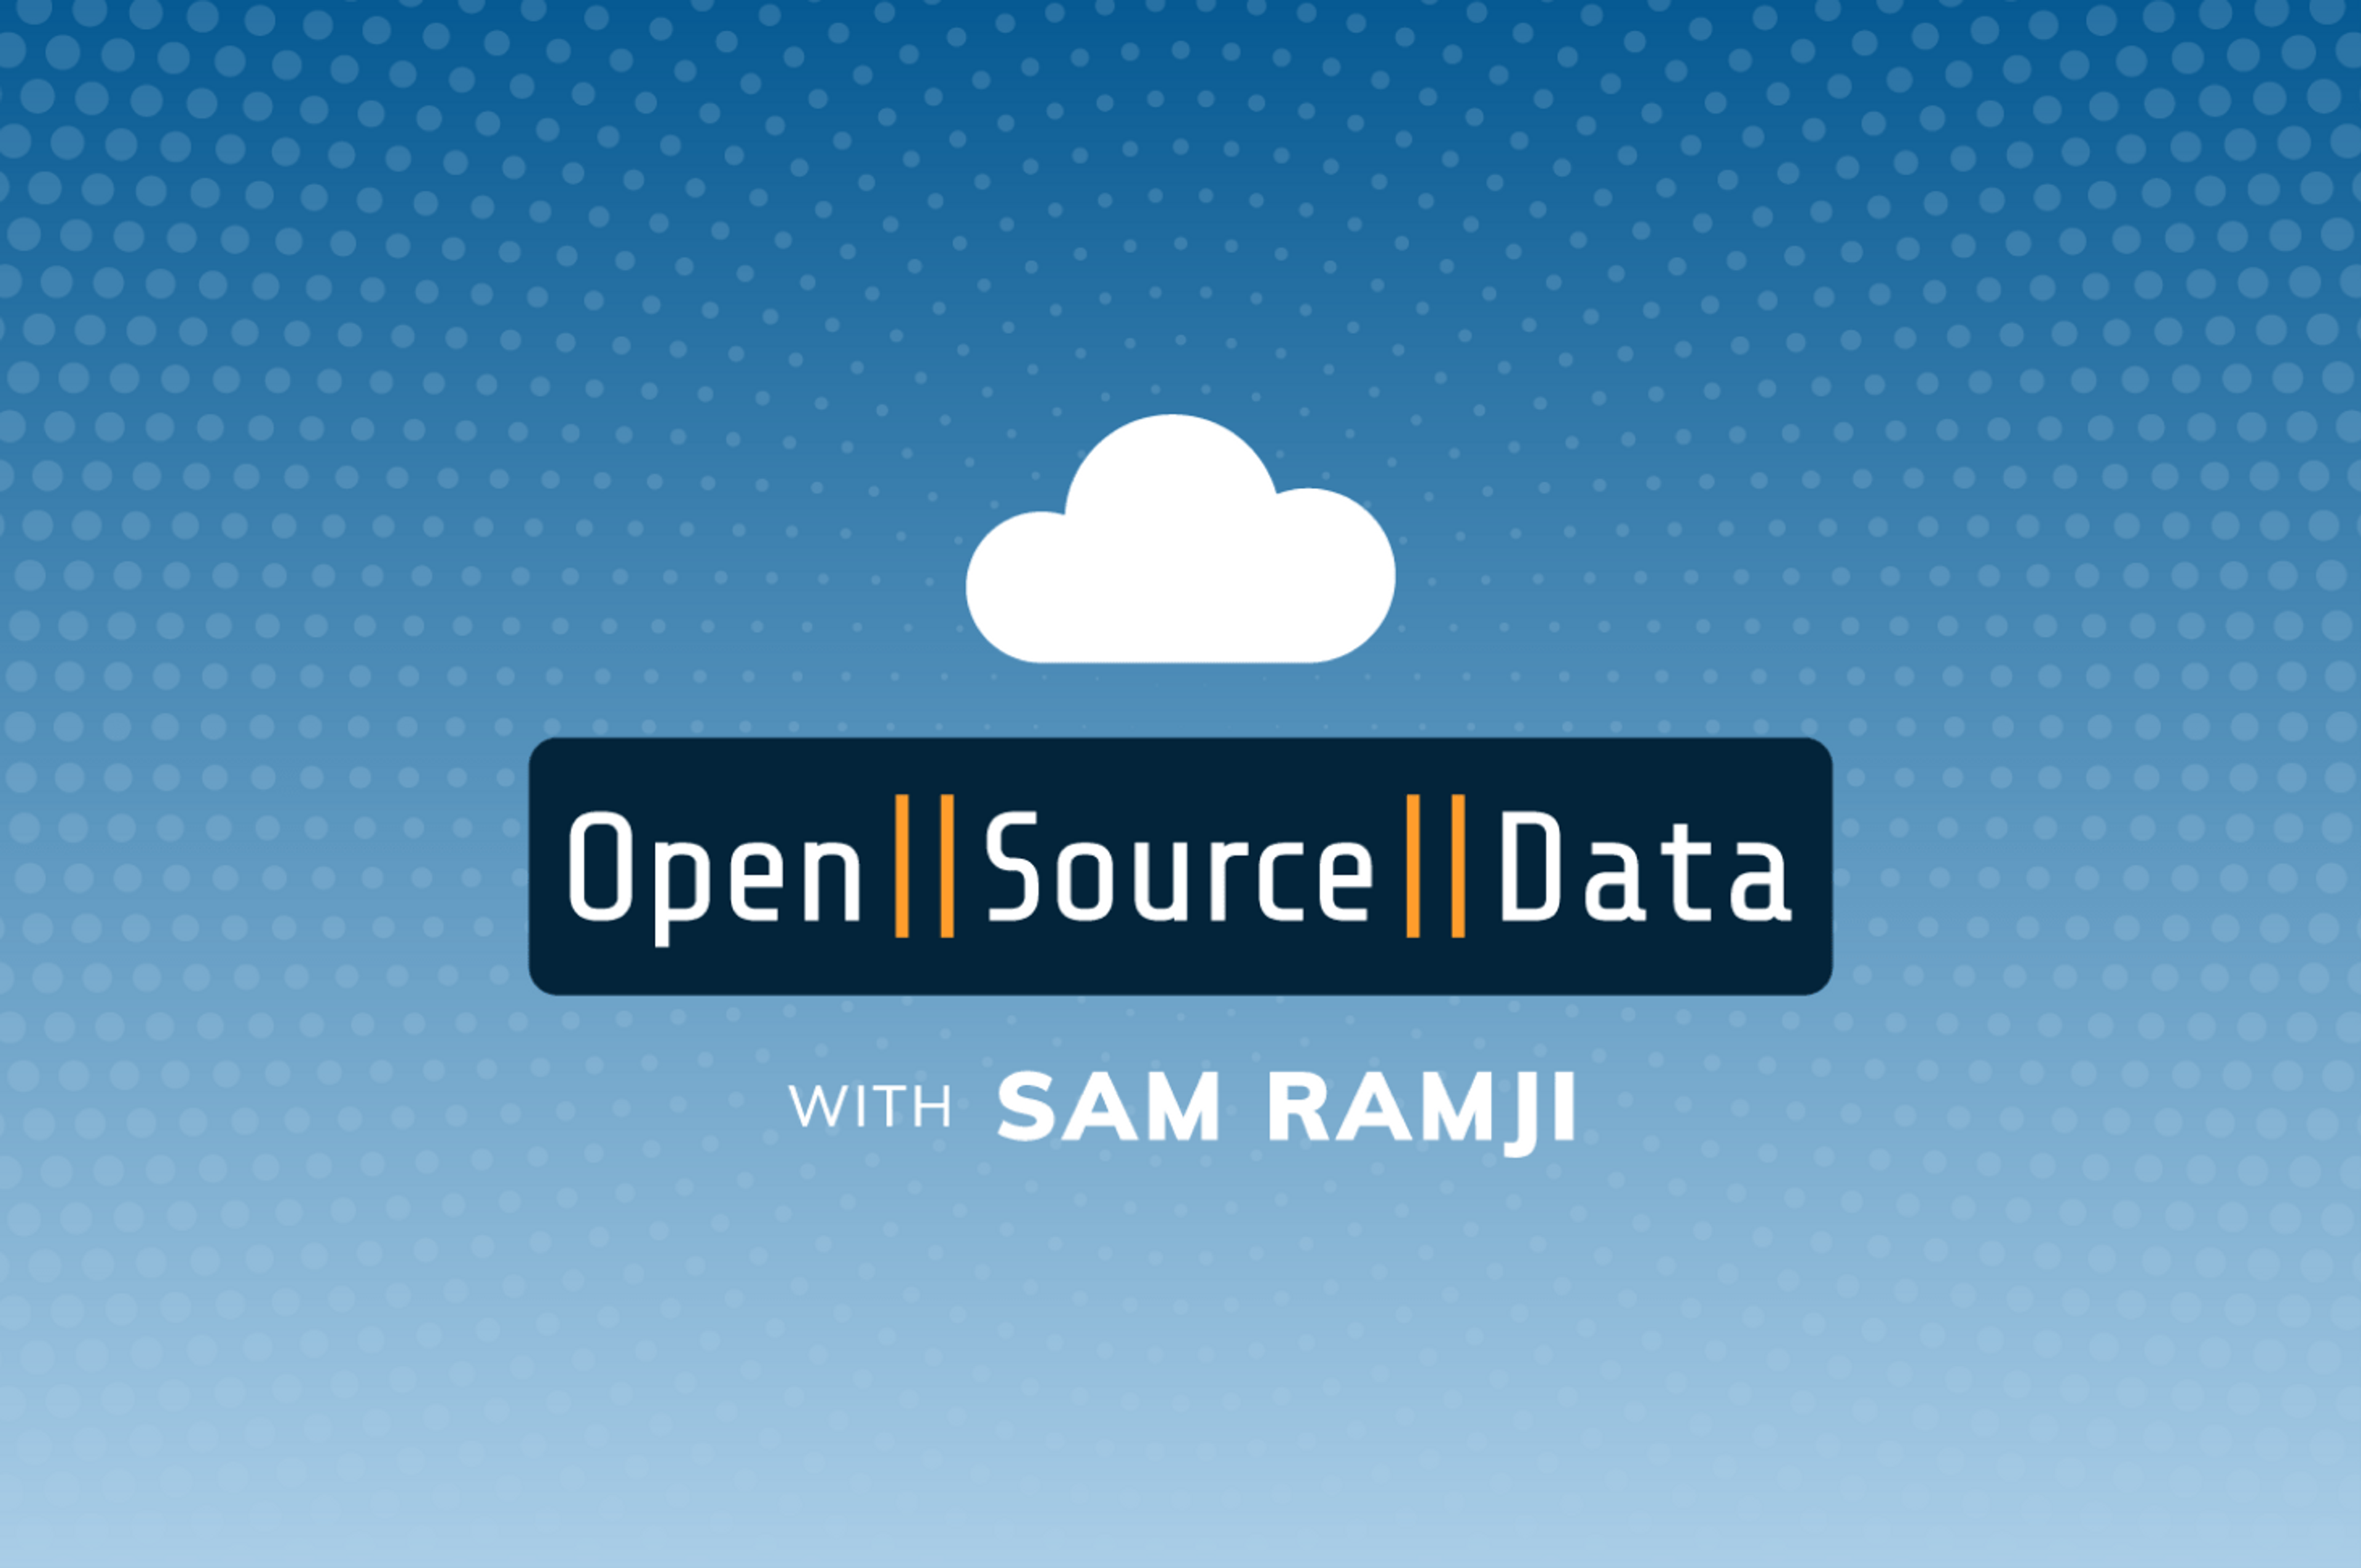 Haven’t checked out the Open||Source||Data podcast just yet? Here’s what you’re missing